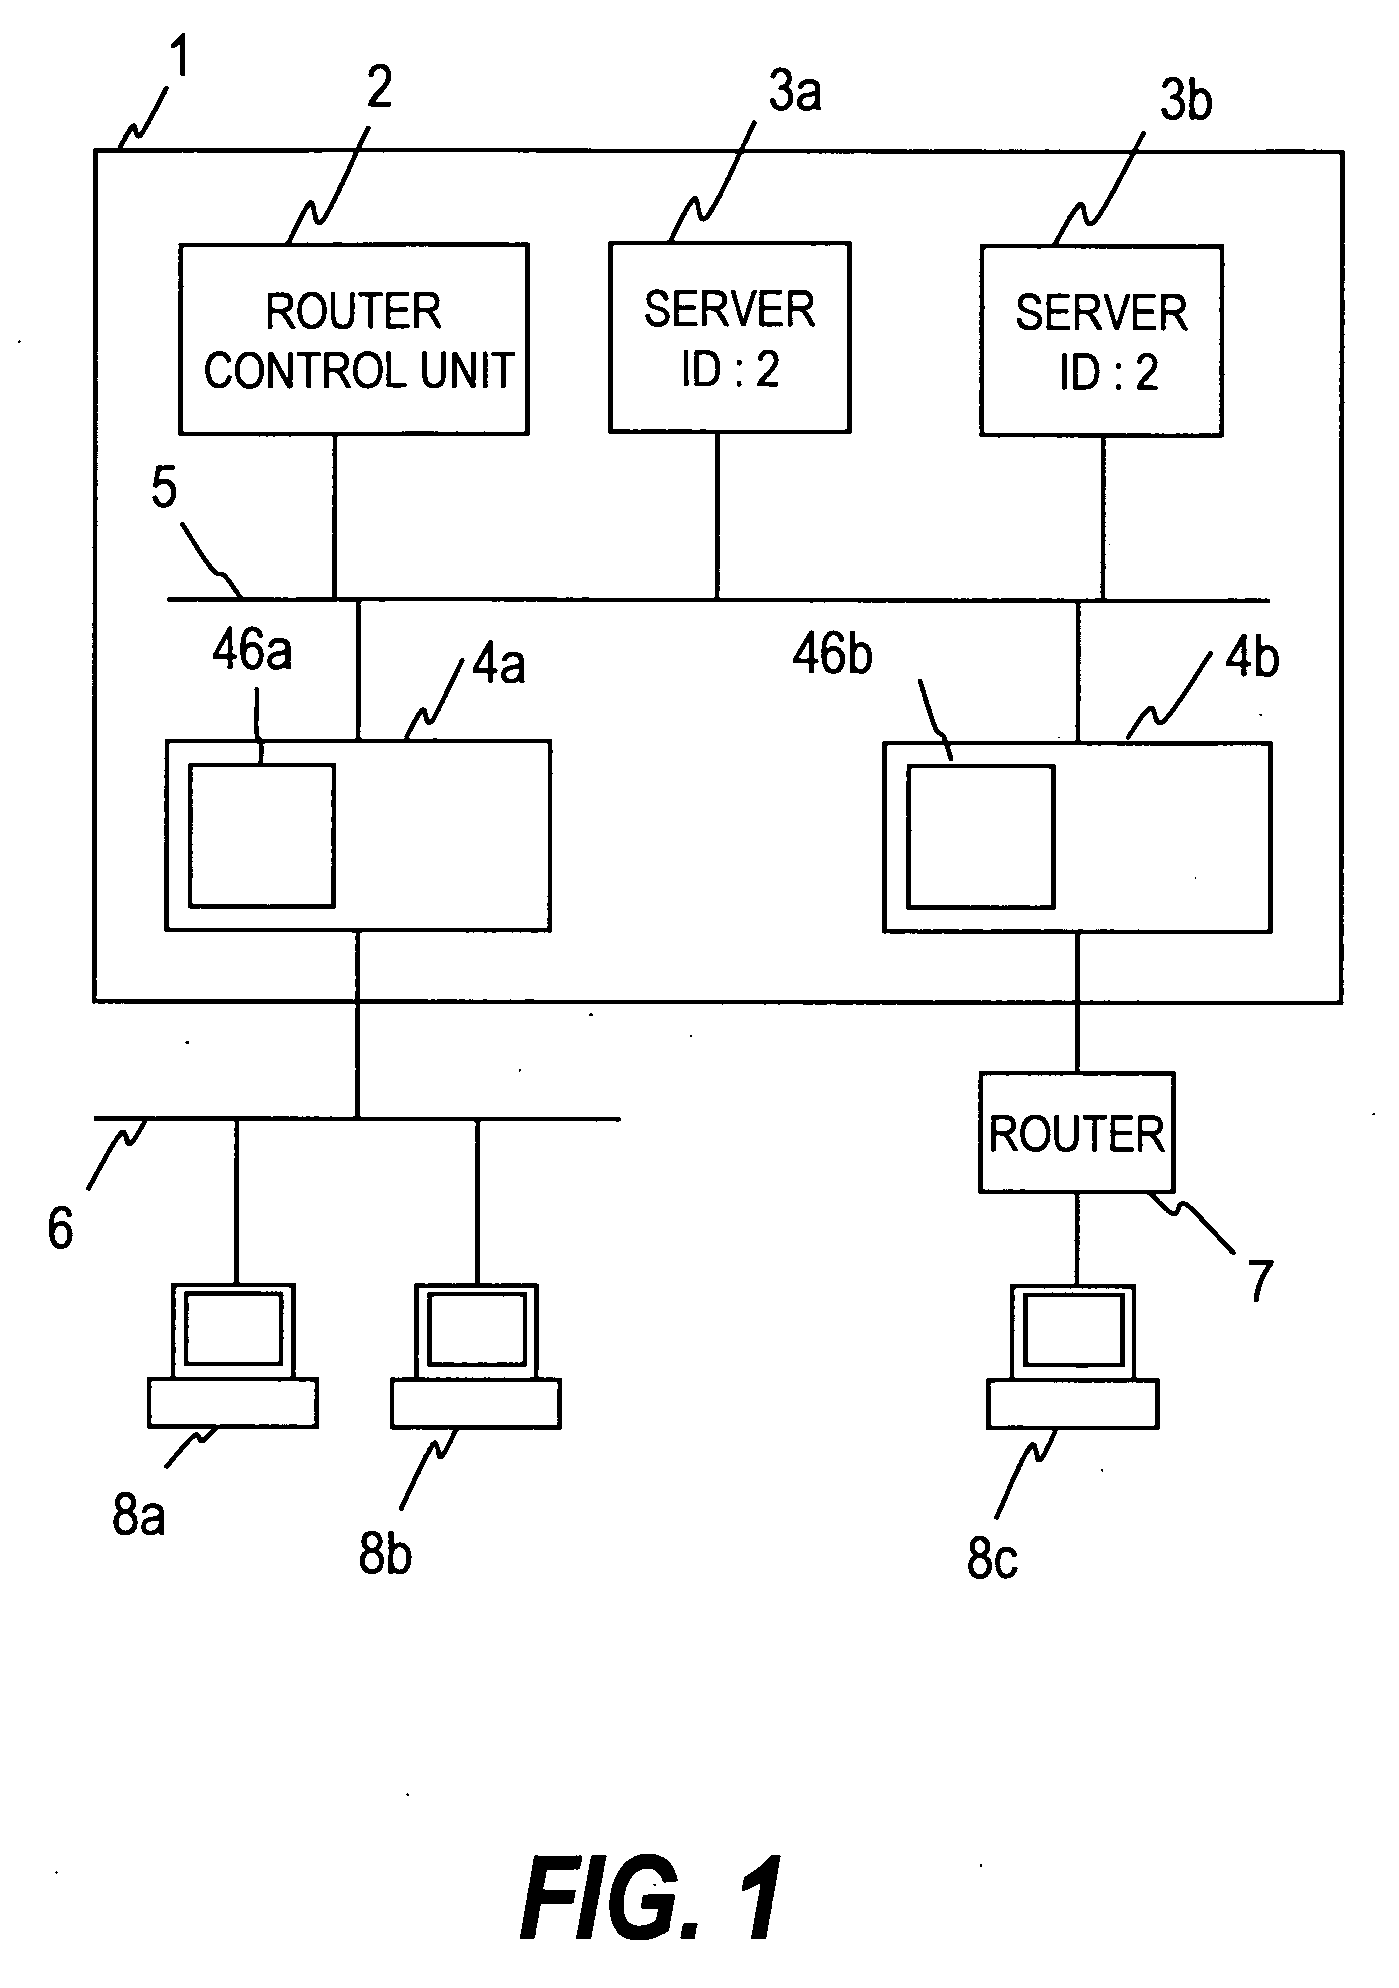 Packet transfer device